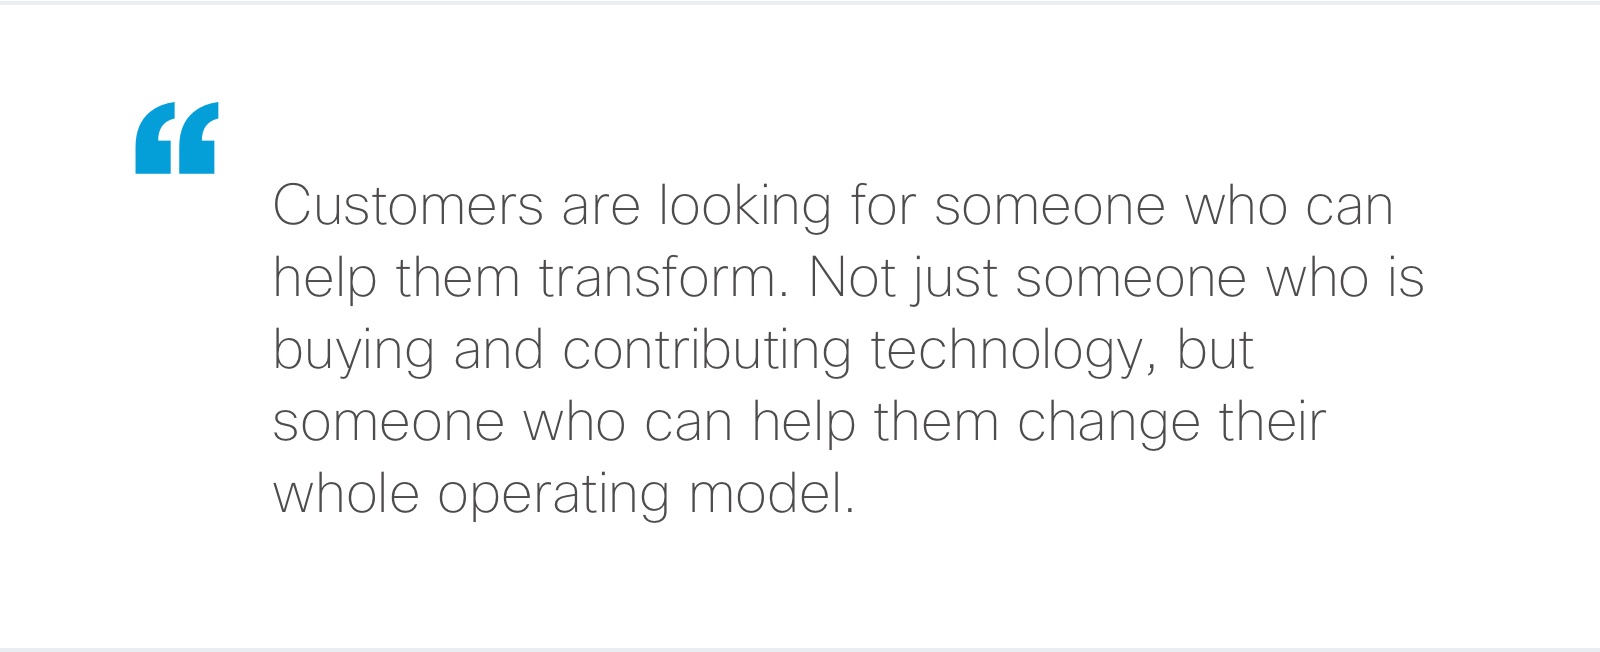 “Customers are looking for someone who can help them transform. Not just someone who is buying and contributing technology, but someone who can help them change their whole operating model.”